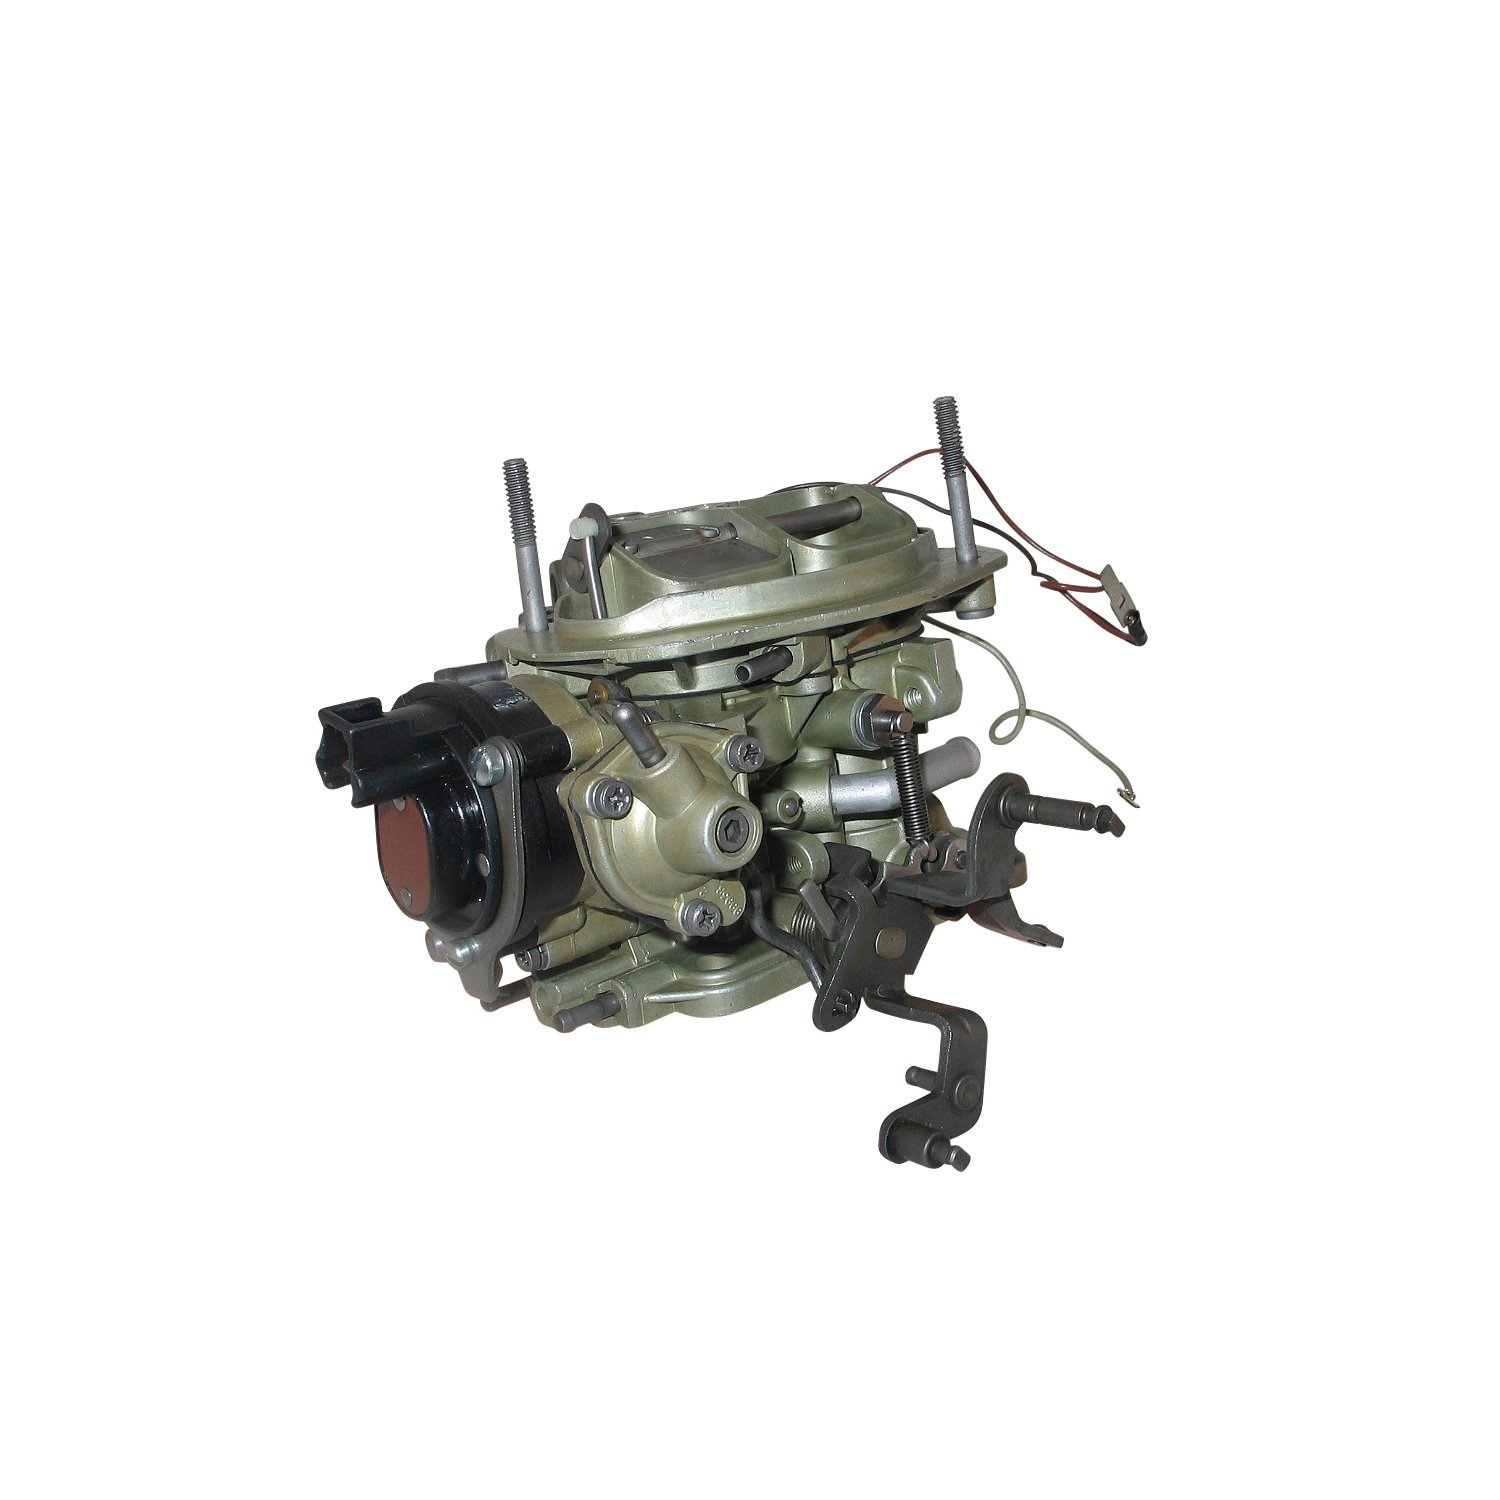 5-5221 Holley Remanufactured Carburetor, 6520, w/A/C-Style